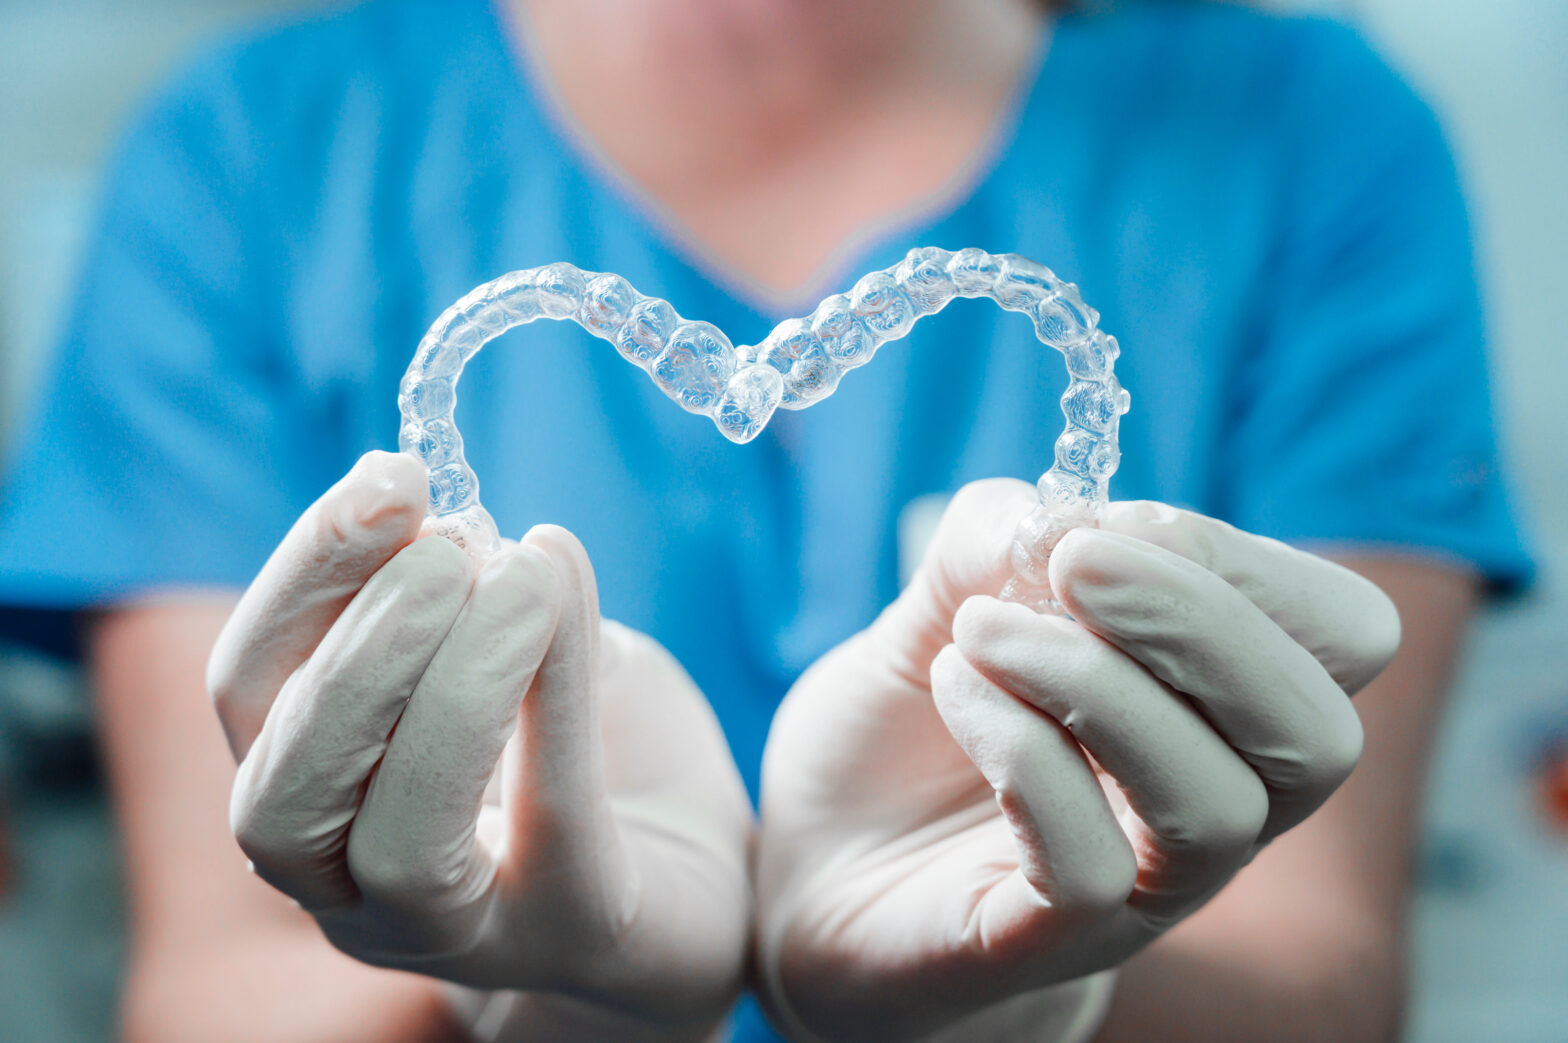 Get WAY more from Invisalign Treatment at a DSD Clinic (Like Us!)